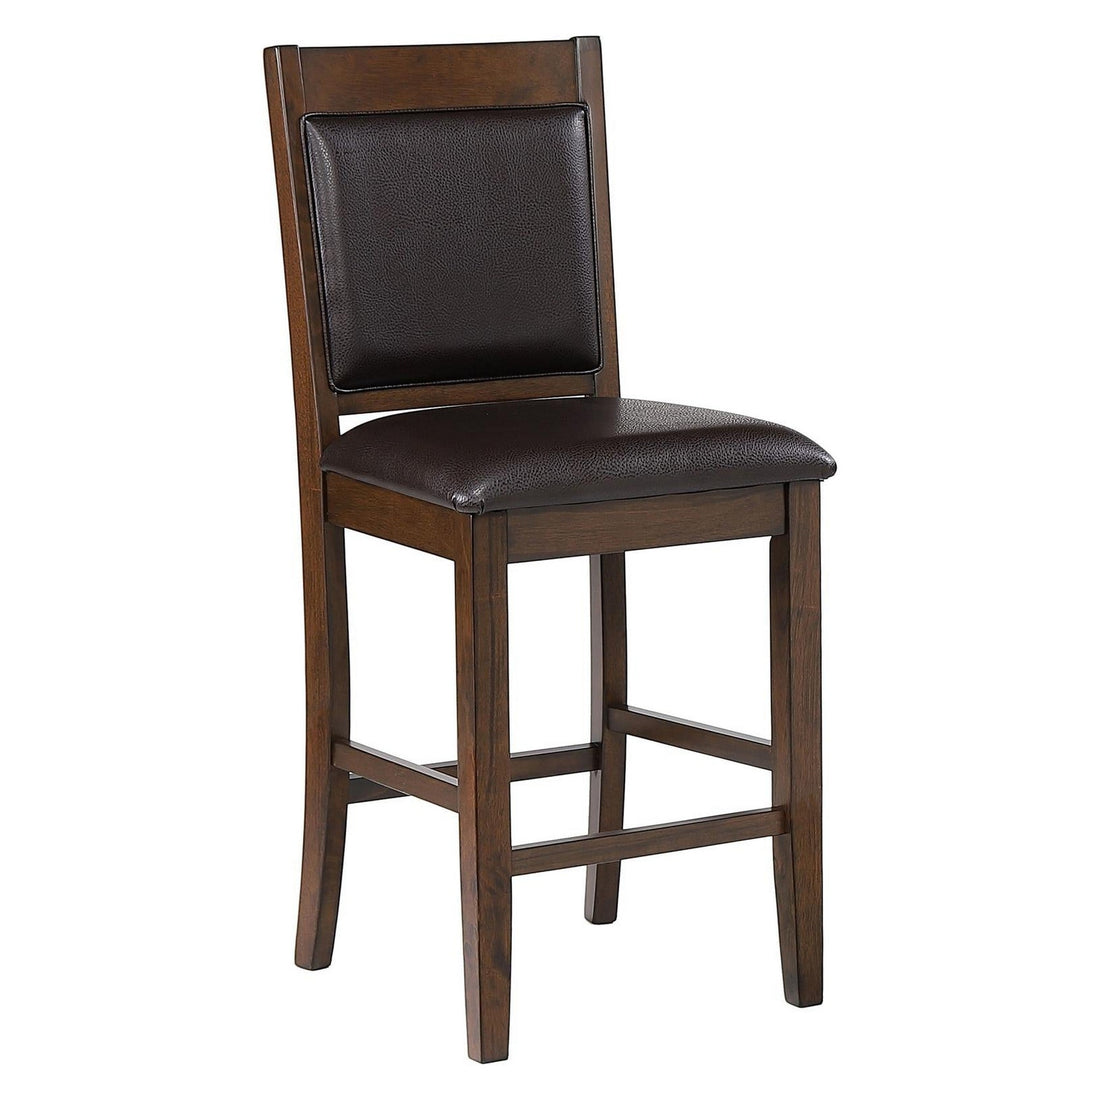 Dewey Upholstered Counter Height Chairs with Footrest (Set of 2) Brown and Walnut 115209